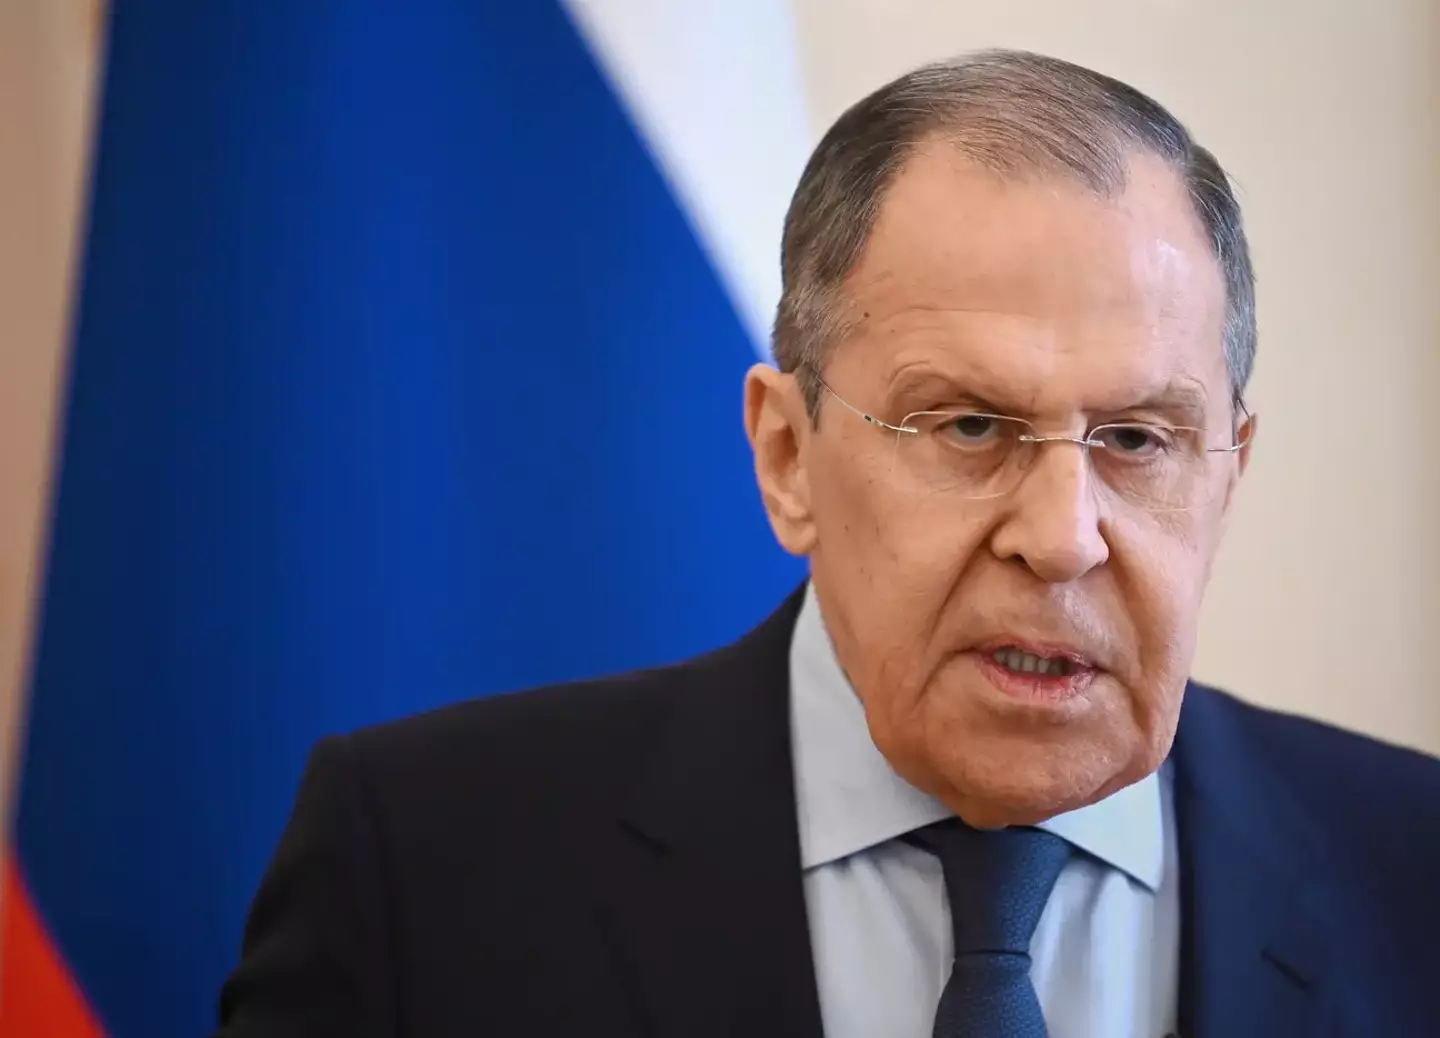 Sergei Lavrov has rubbished claims Putin is ill.